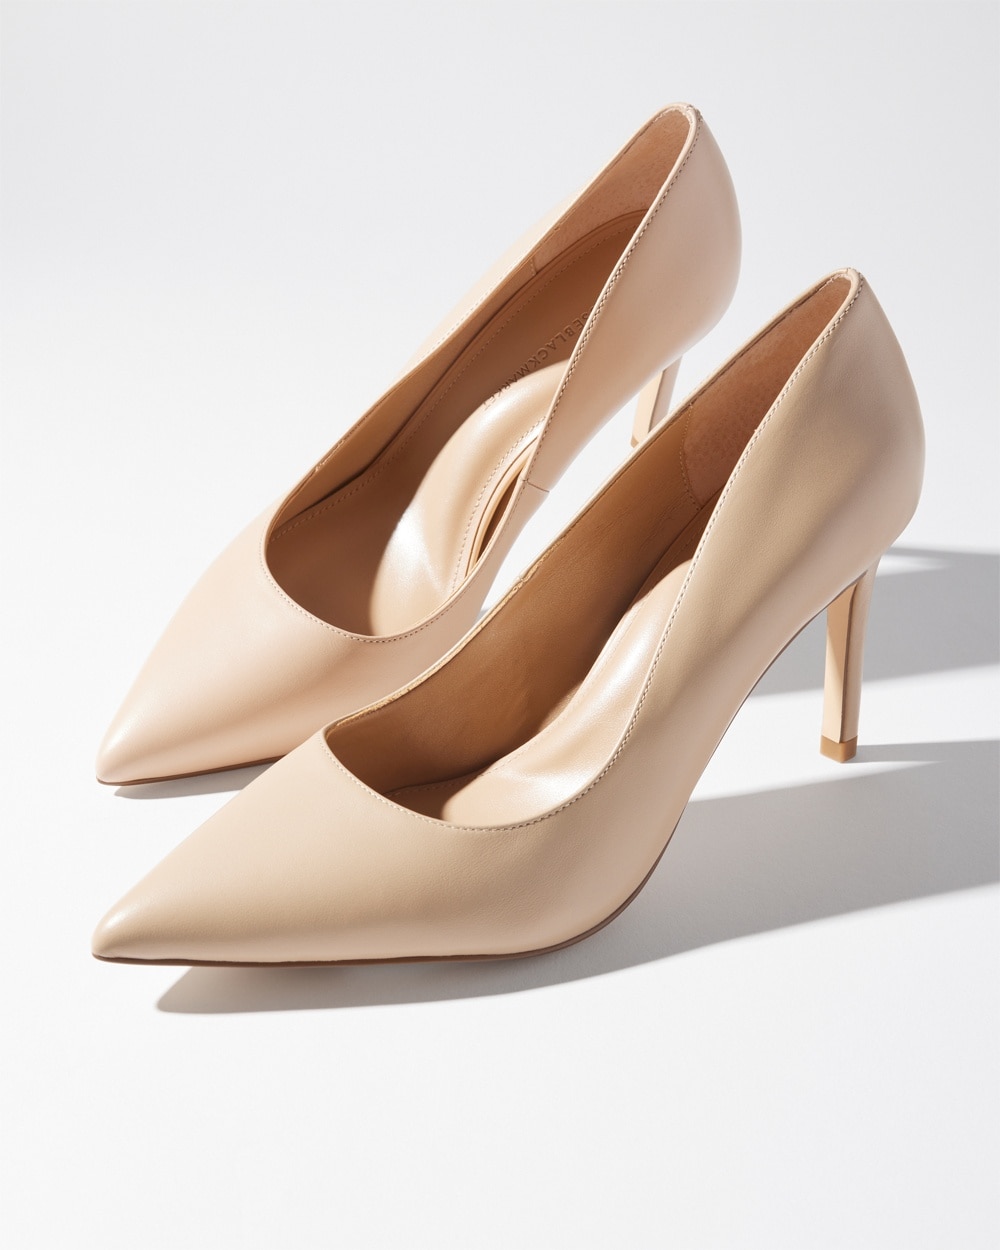 White House Black Market Leather Comfort Pumps In Tan